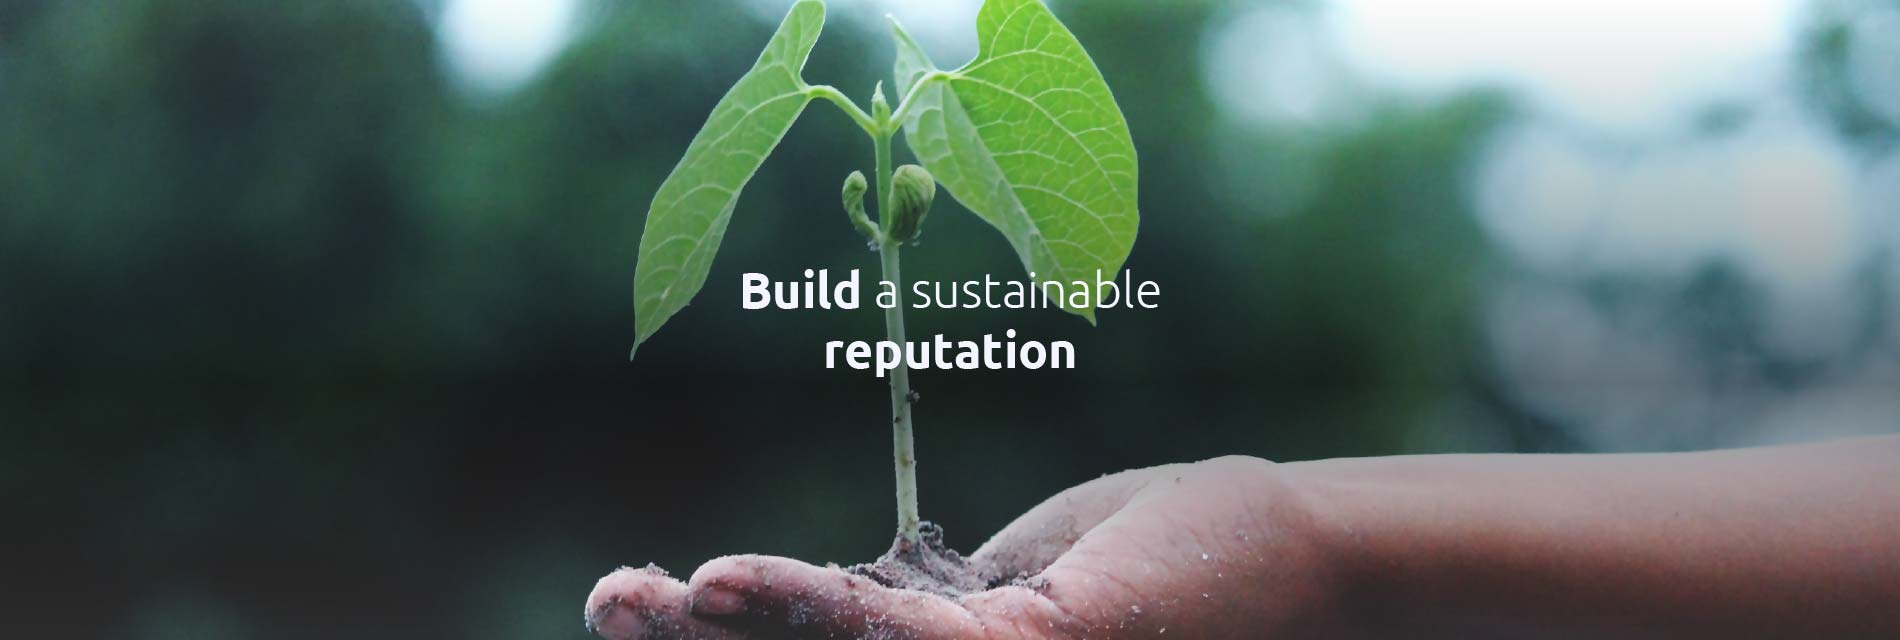 Build a sustainable reputation